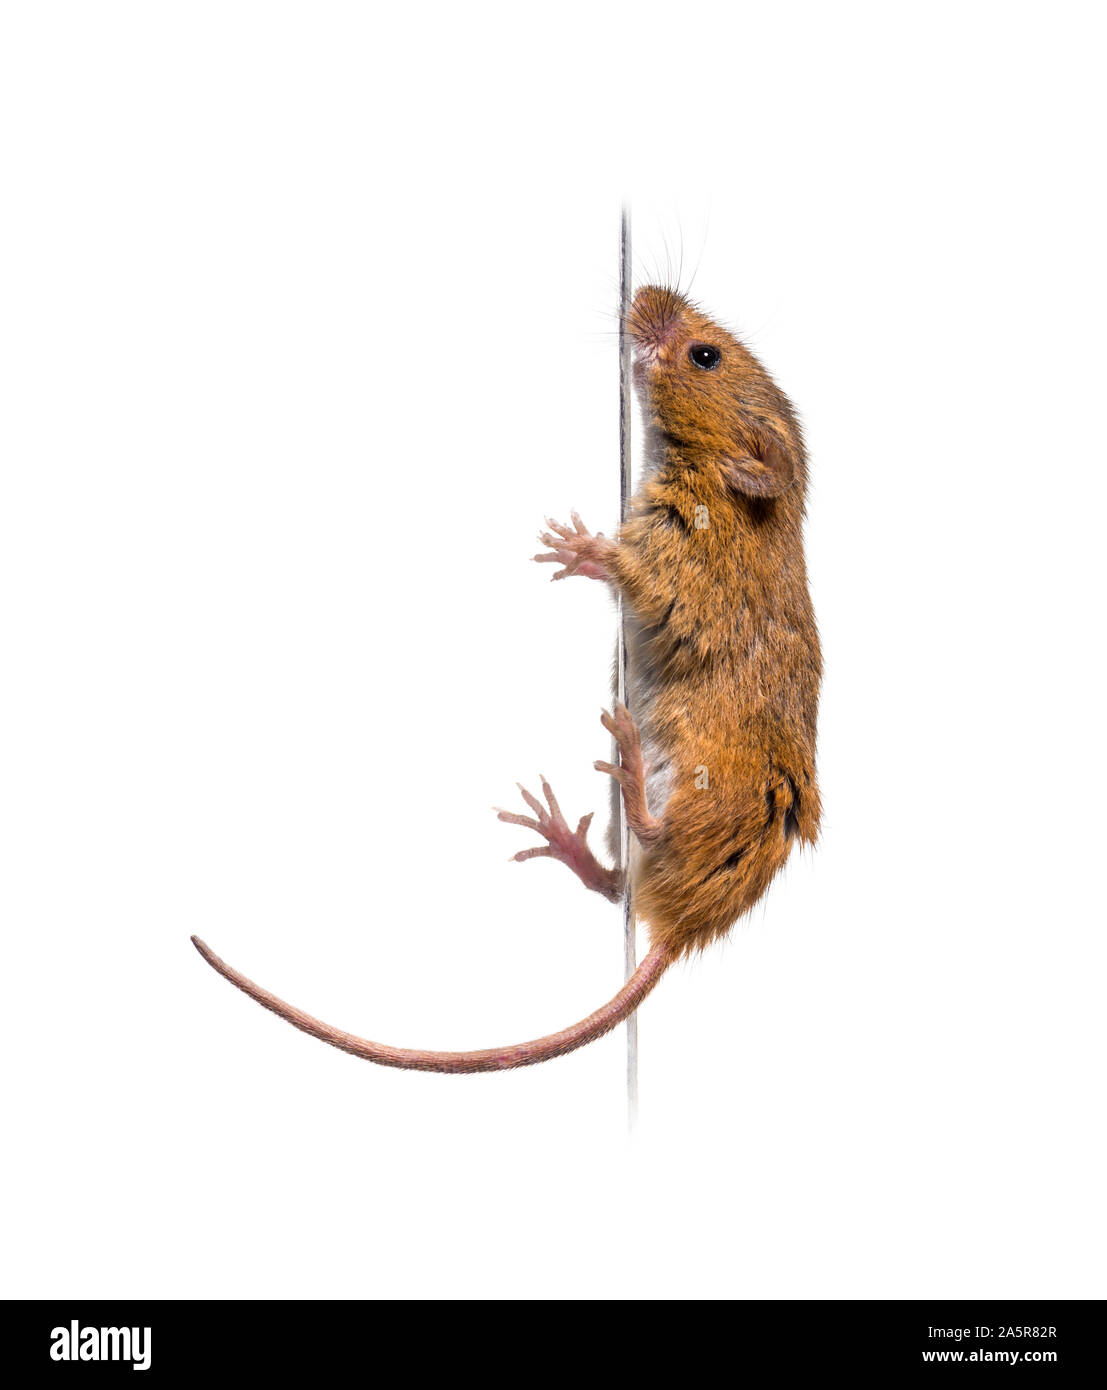 Eurasian harvest mouse, Micromys minutus, climbing in front of white background Stock Photo